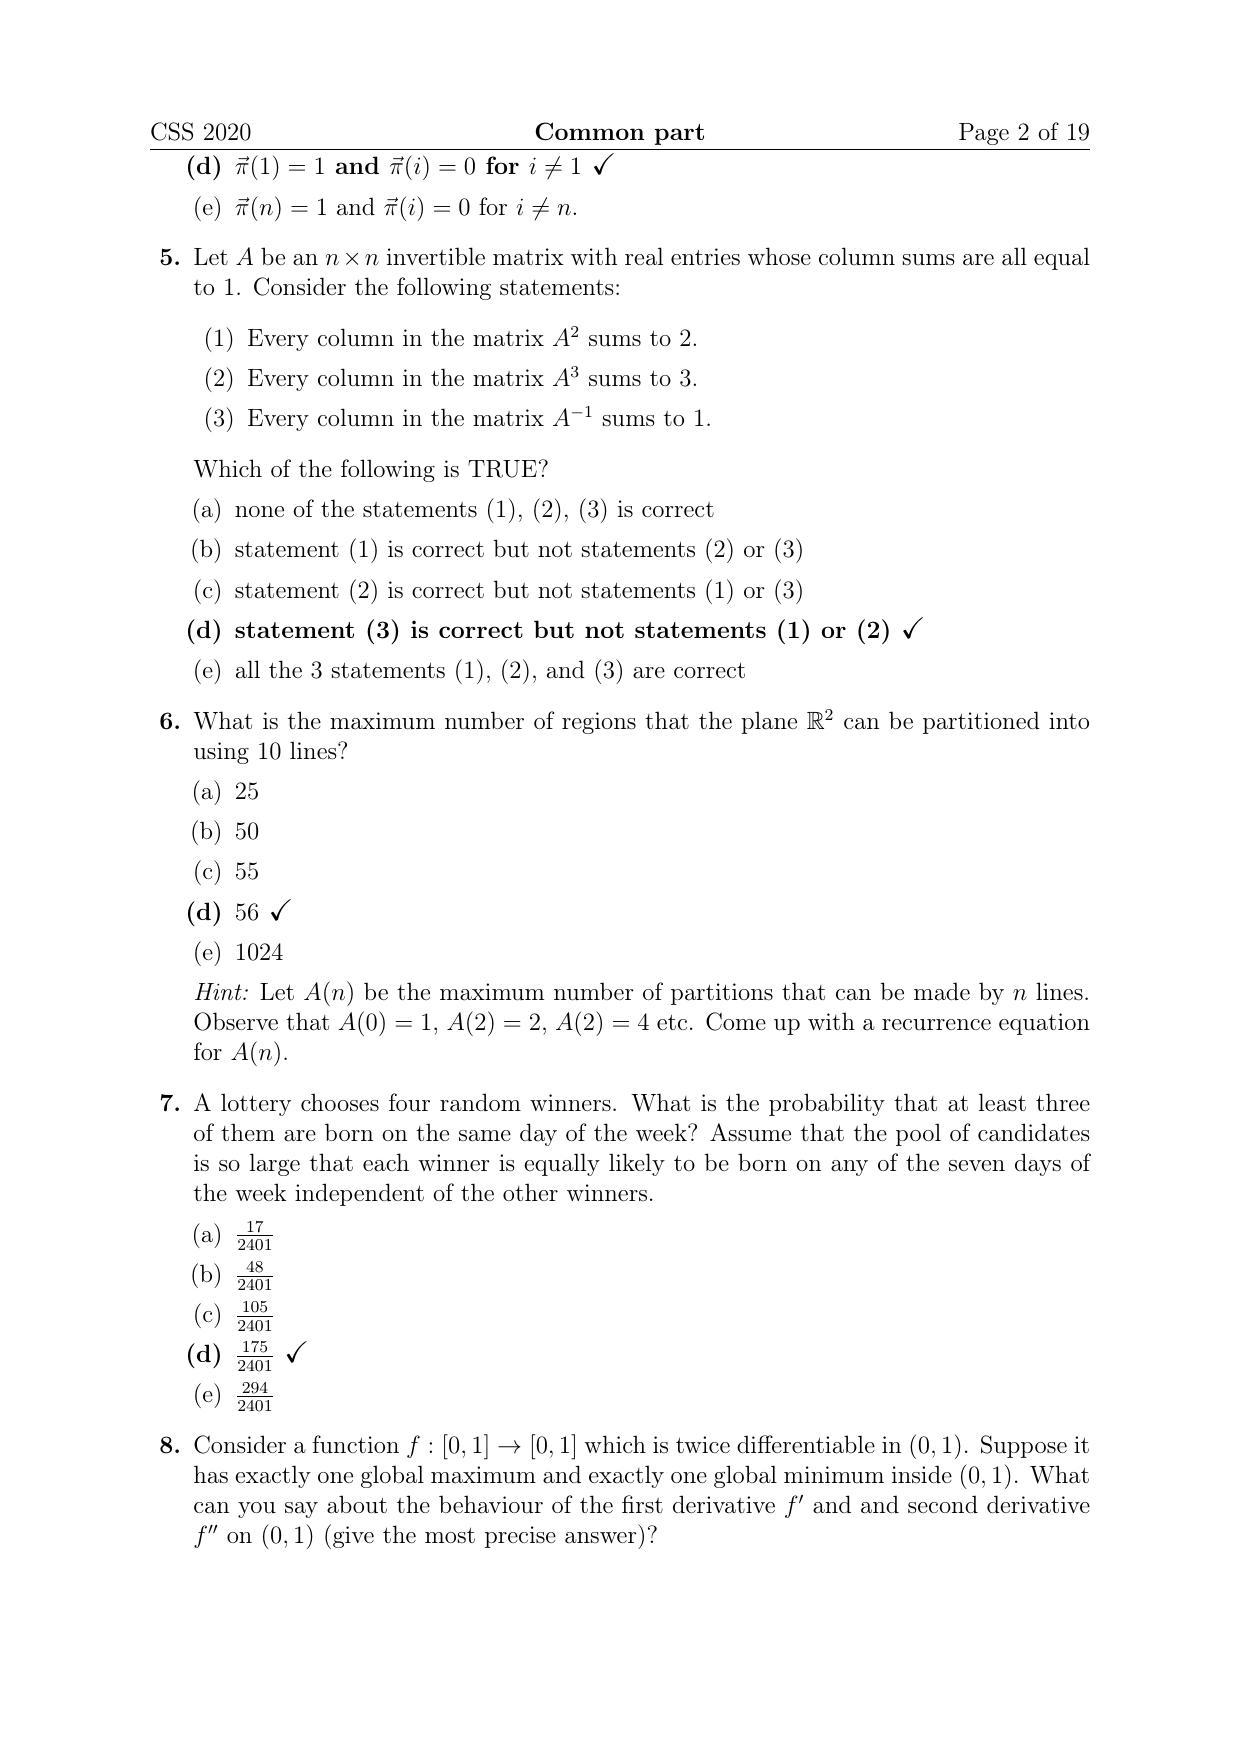 TIFR GS 2020 Computer & Systems Sciences Question Paper - Page 2